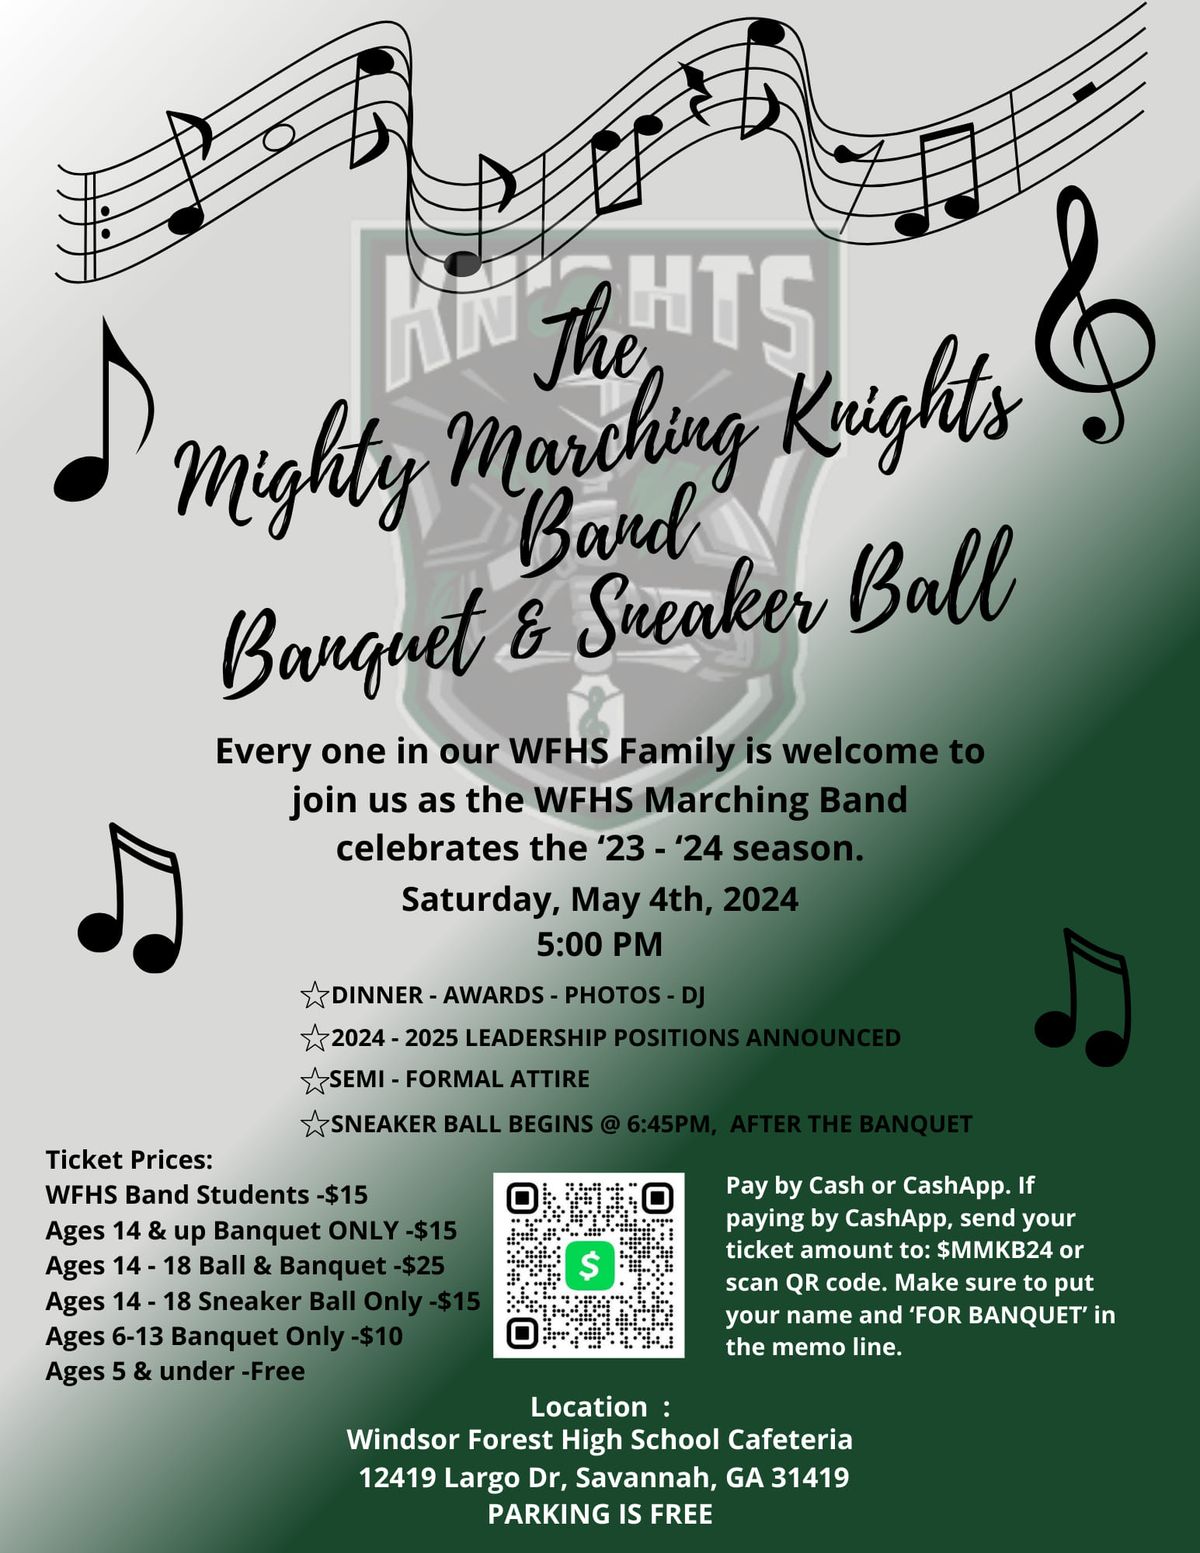 The 1st Annual Mighty Marching Knights Band Banquet & Sneaker Ball